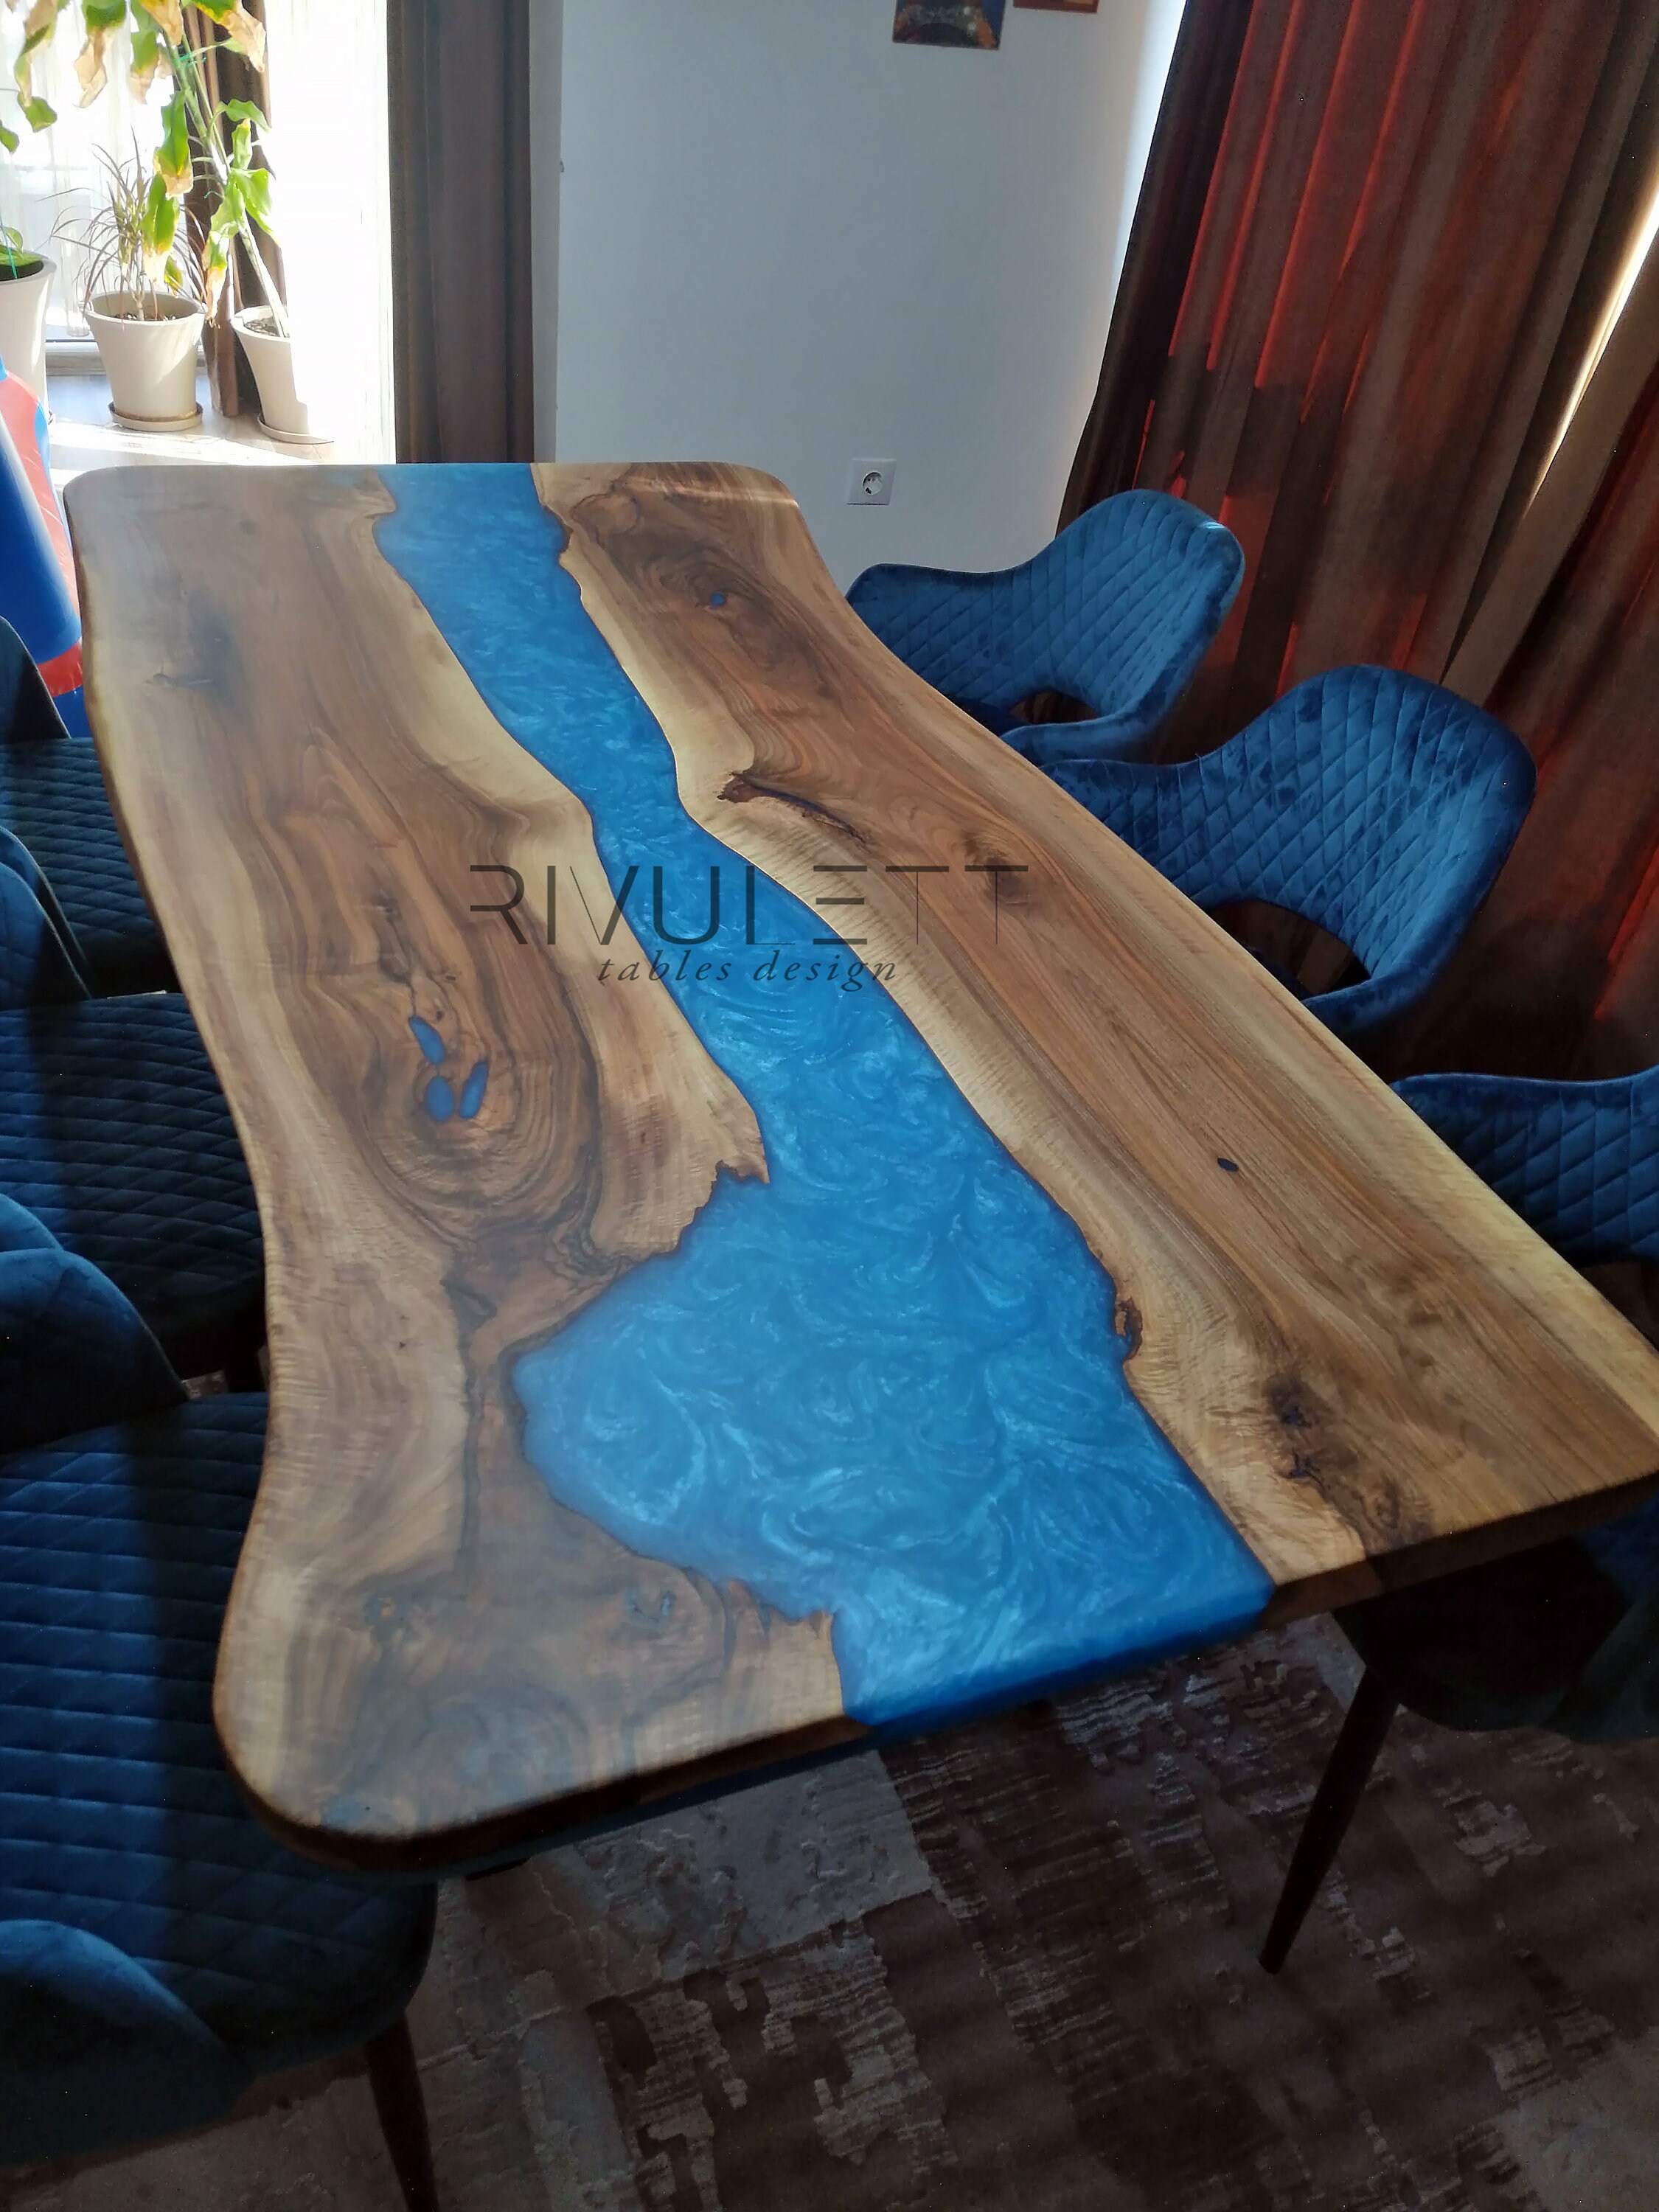 Live Edge Dining Table/ Blue Epoxy Resin Table/Dining Room | Etsy